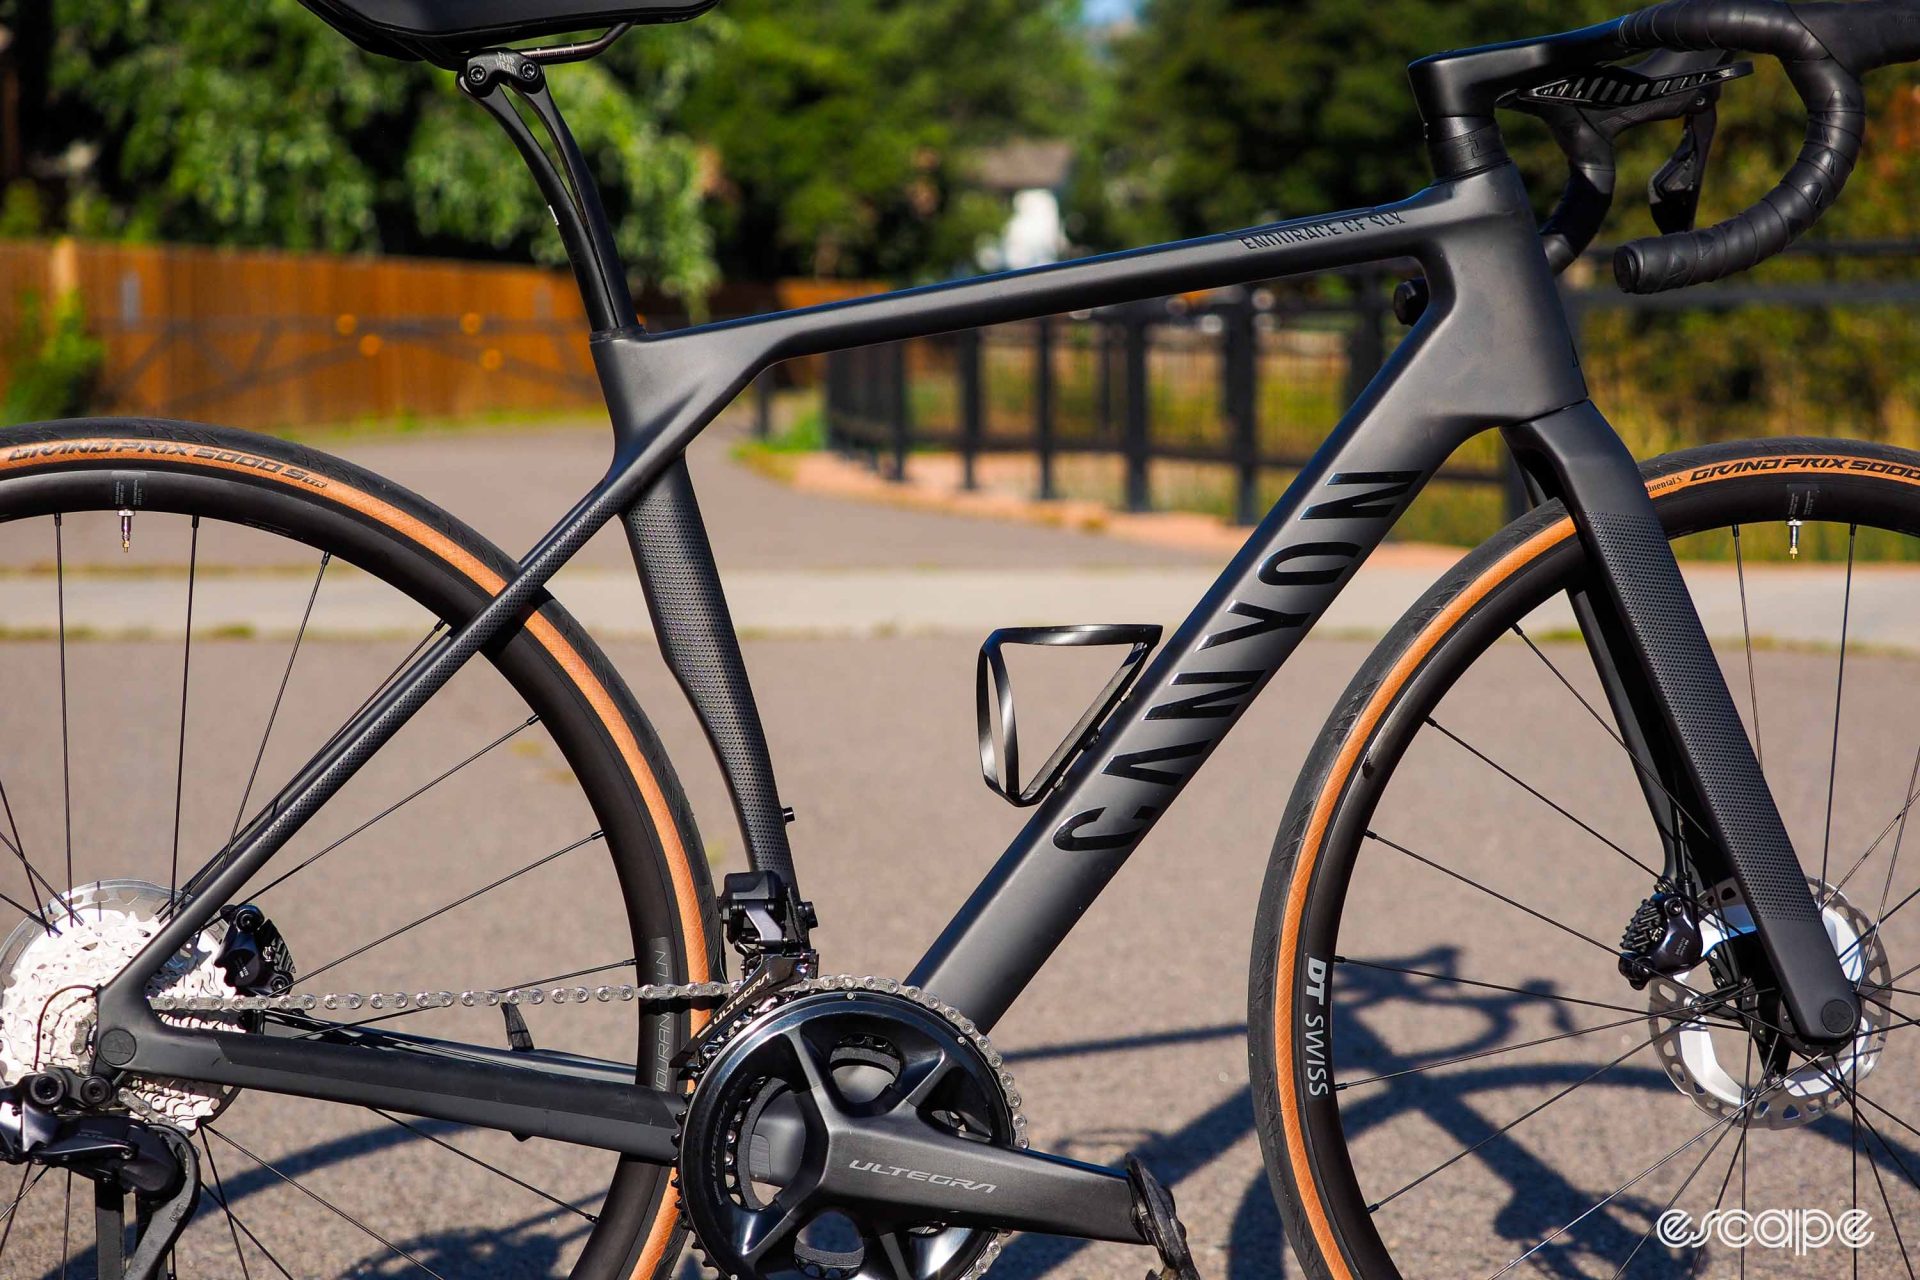 The new Canyon Endurace frame, shown here in black, features updated aerodynamic shaping, in particular on the down tube, which features a truncated aero profile, and the seat tube, with a slight aero shape and an aggressive rear wheel cutout.